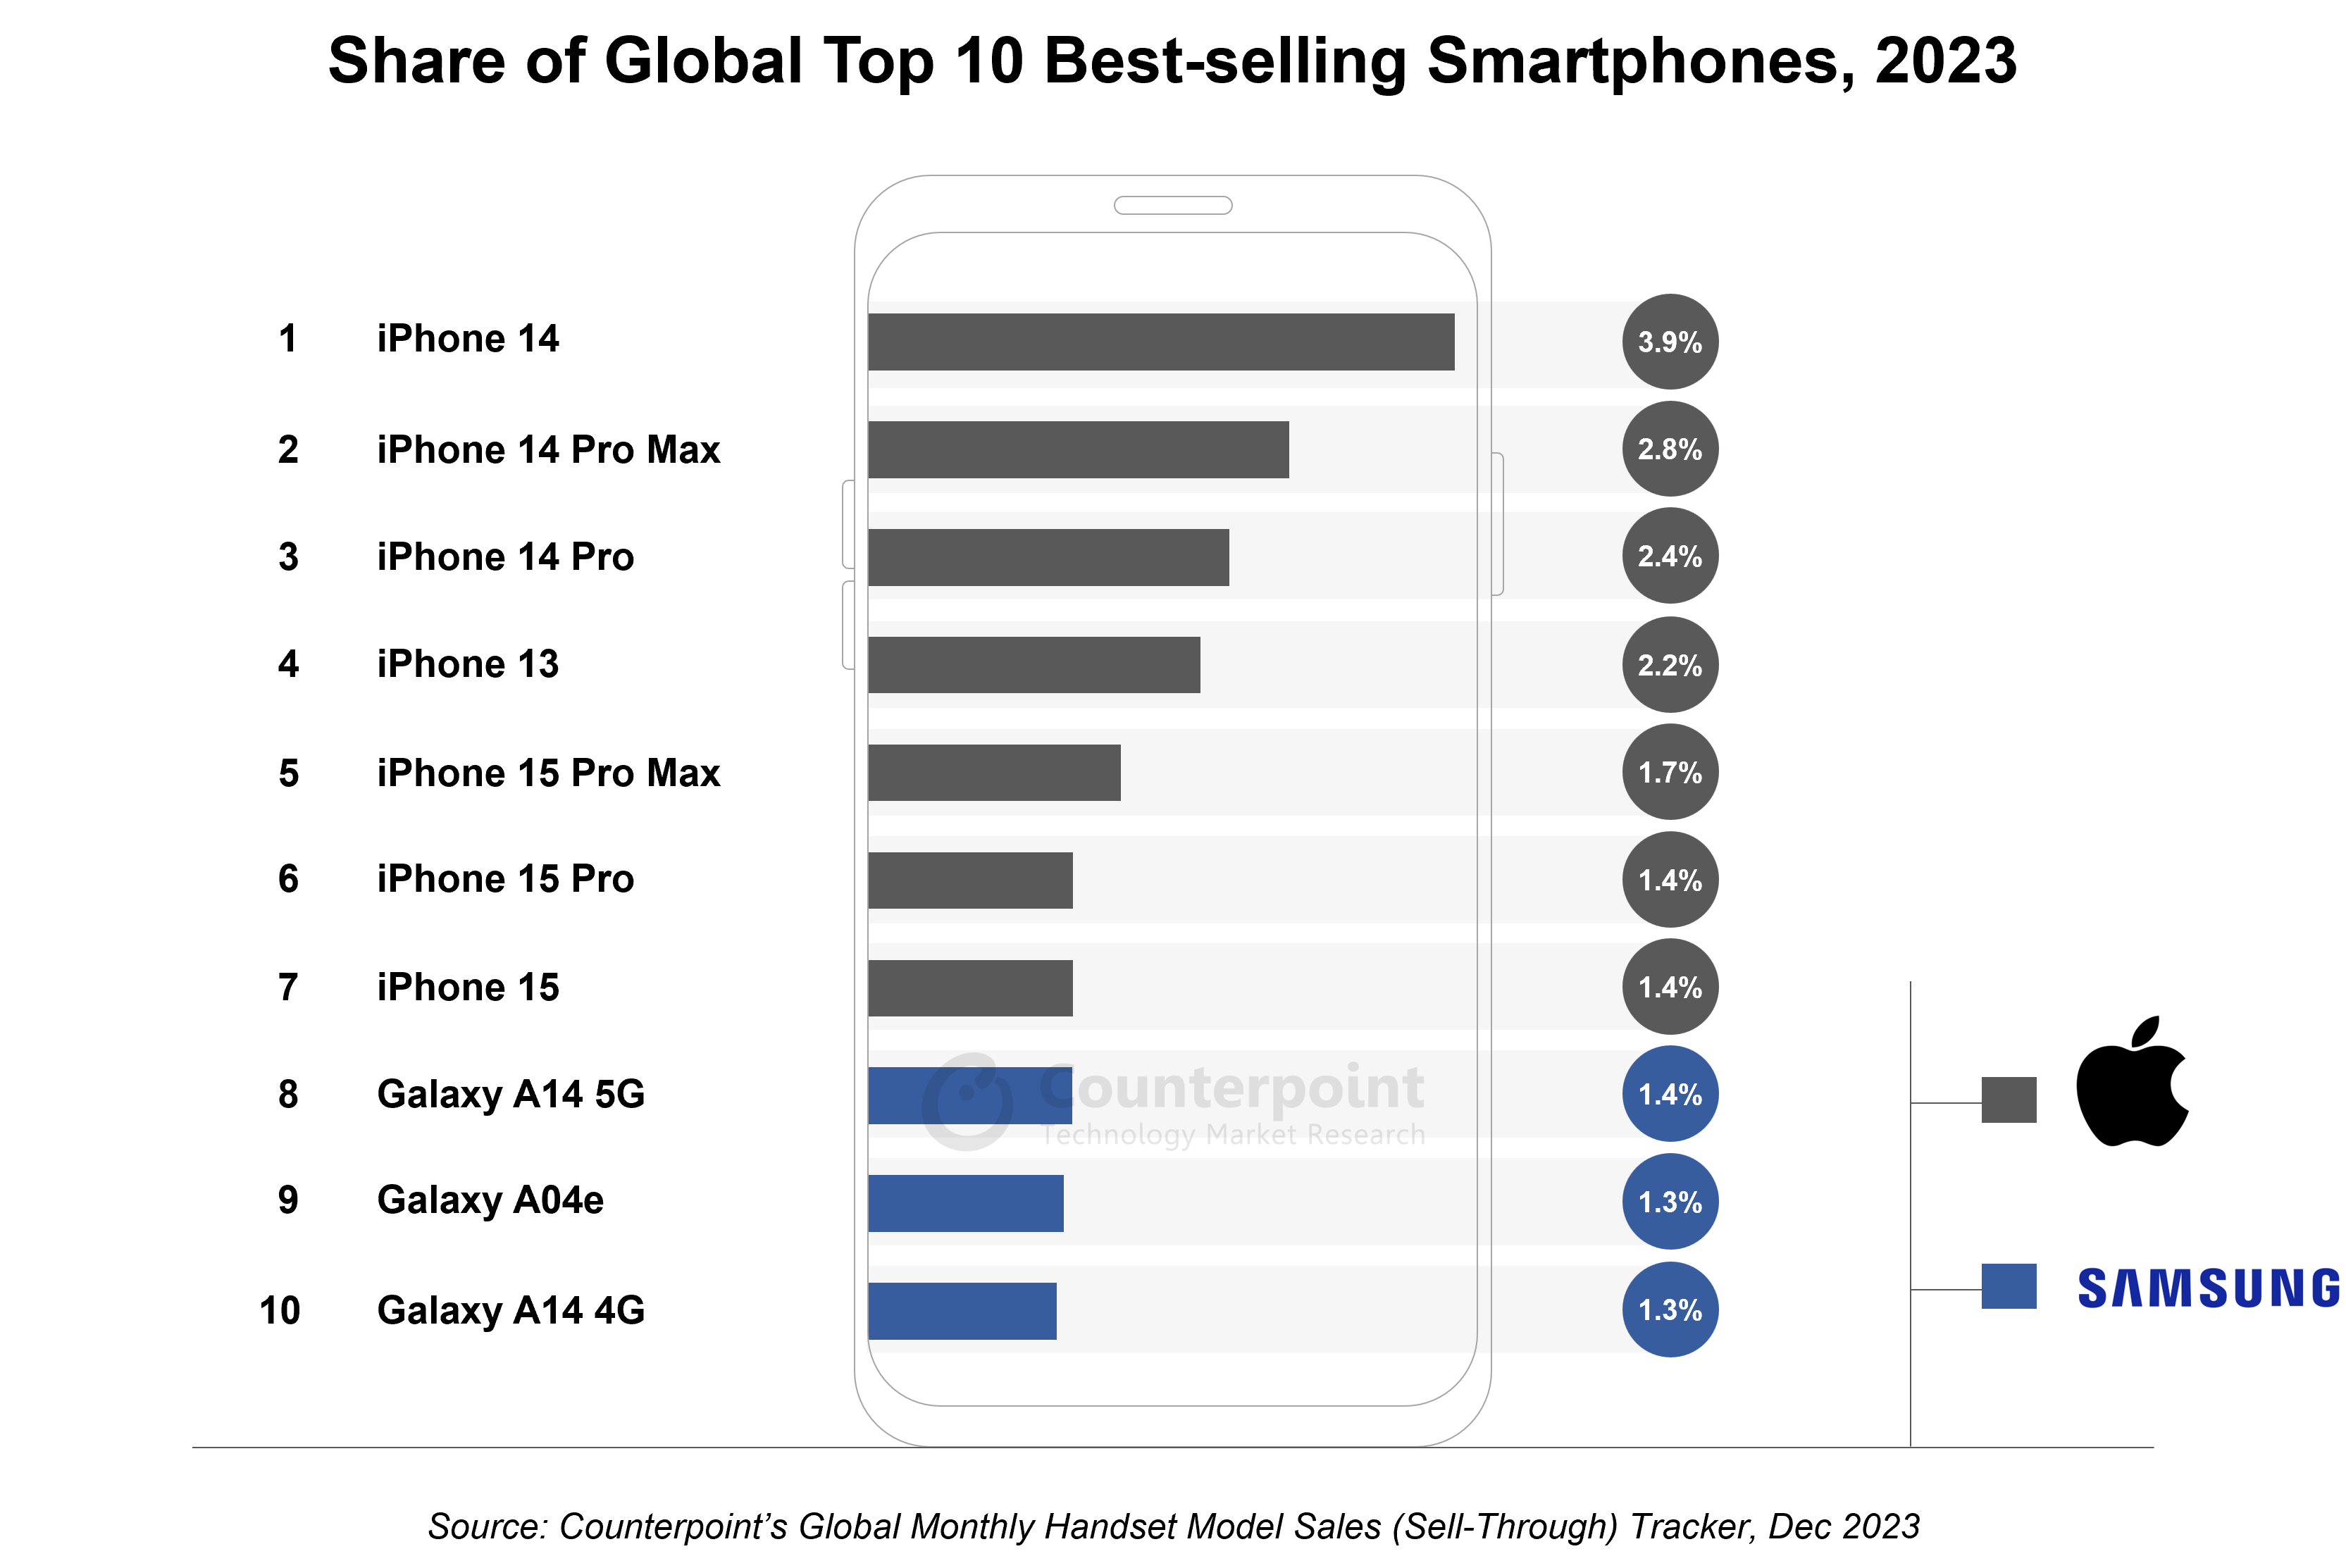 wp-content/uploads/2024/02/Share-of-Global-Top-10-Best-selling-Smartphones-2023.png